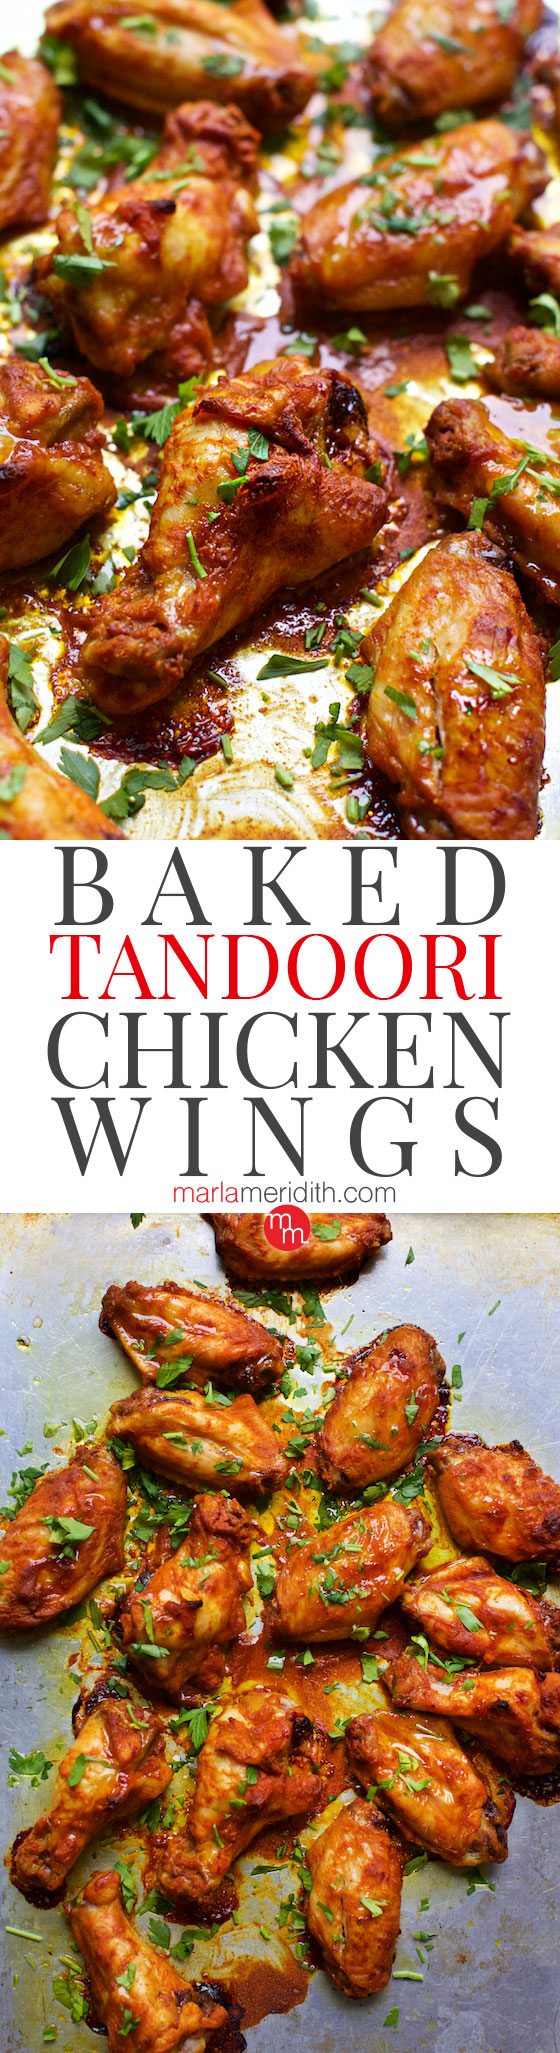 Baked Tandoori Chicken Wings are a super flavorful appetizer! Get the #recipe at MarlaMeridith.com ( @marlameridith )